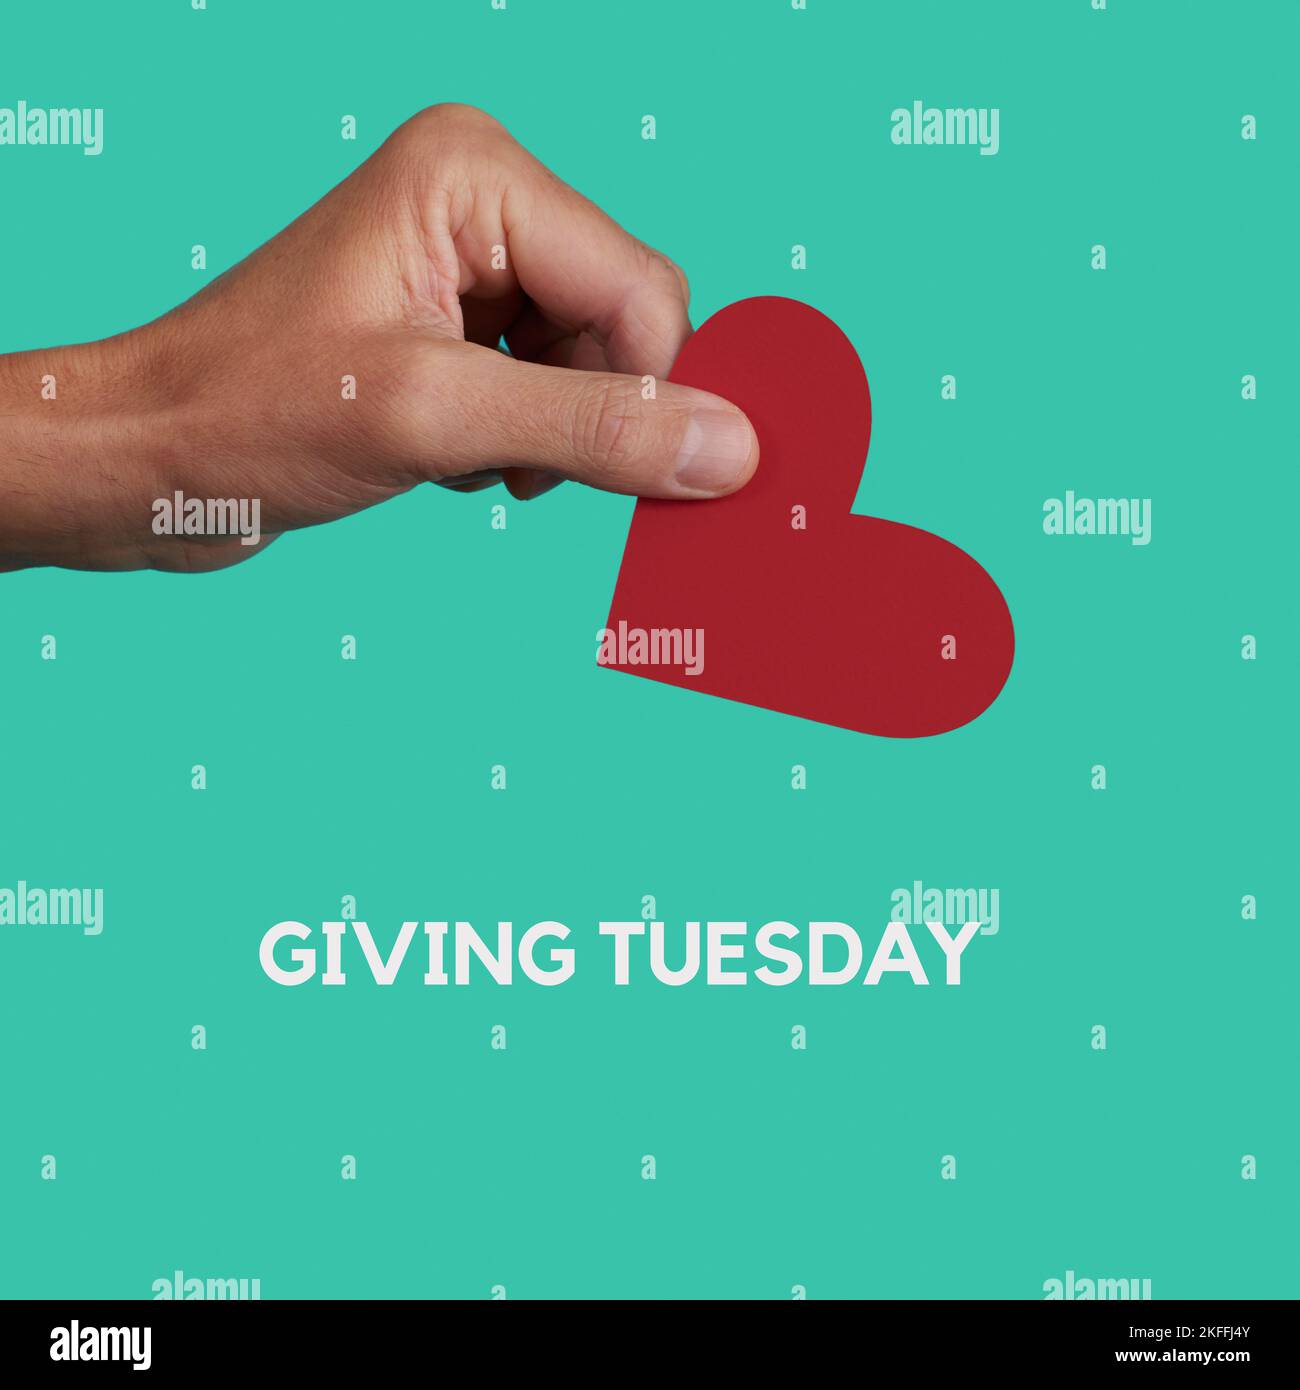 the text giving tuesday and a man giving a red heart on a greenish blue background, in a square format Stock Photo